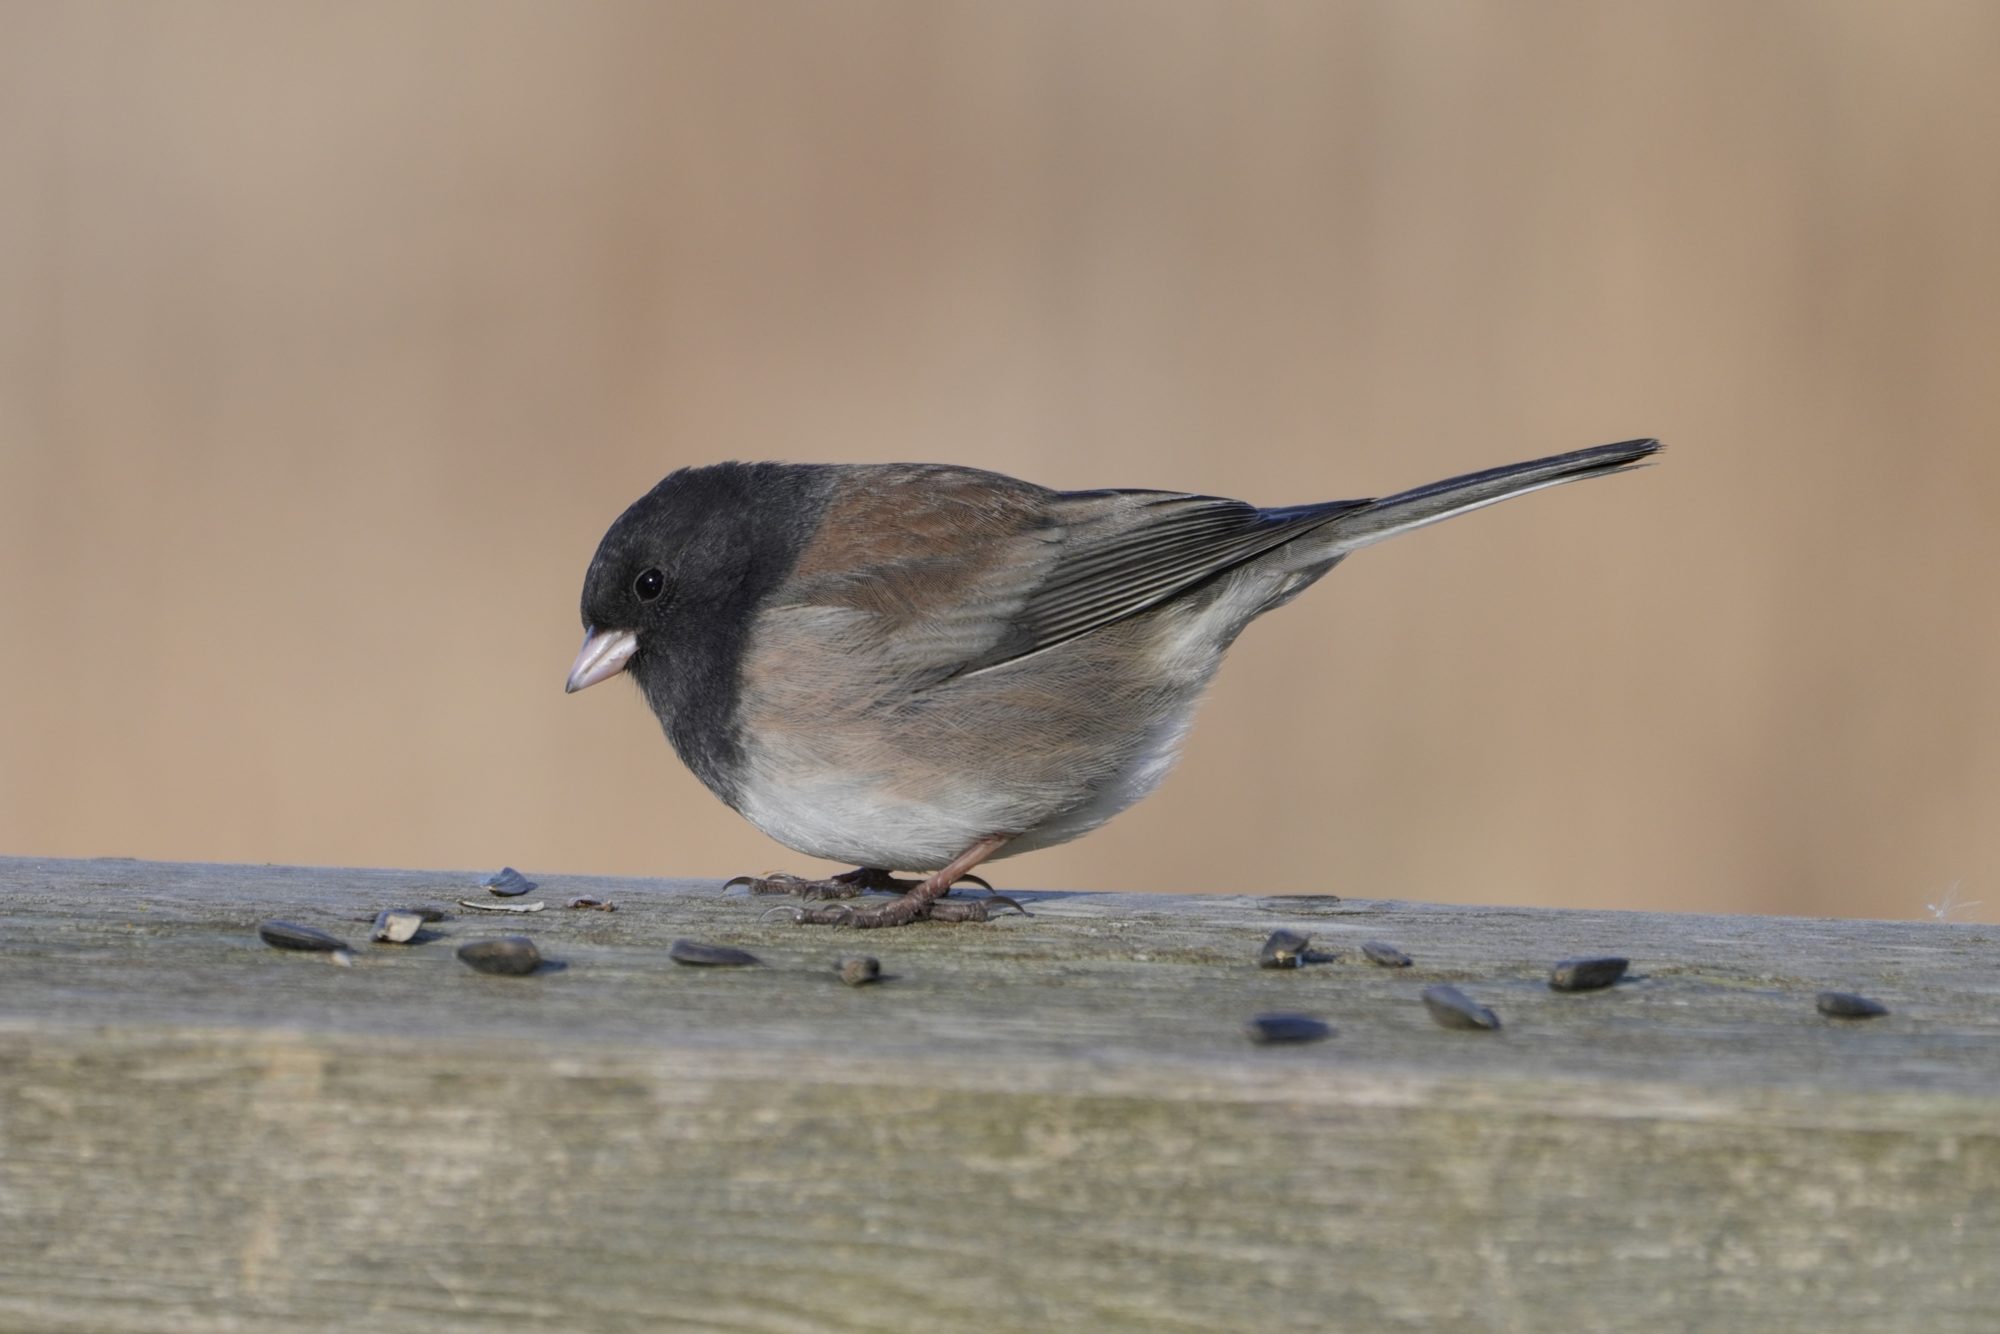 A Dark-eyed Junco on a wooden fence, surrounded by some seeds